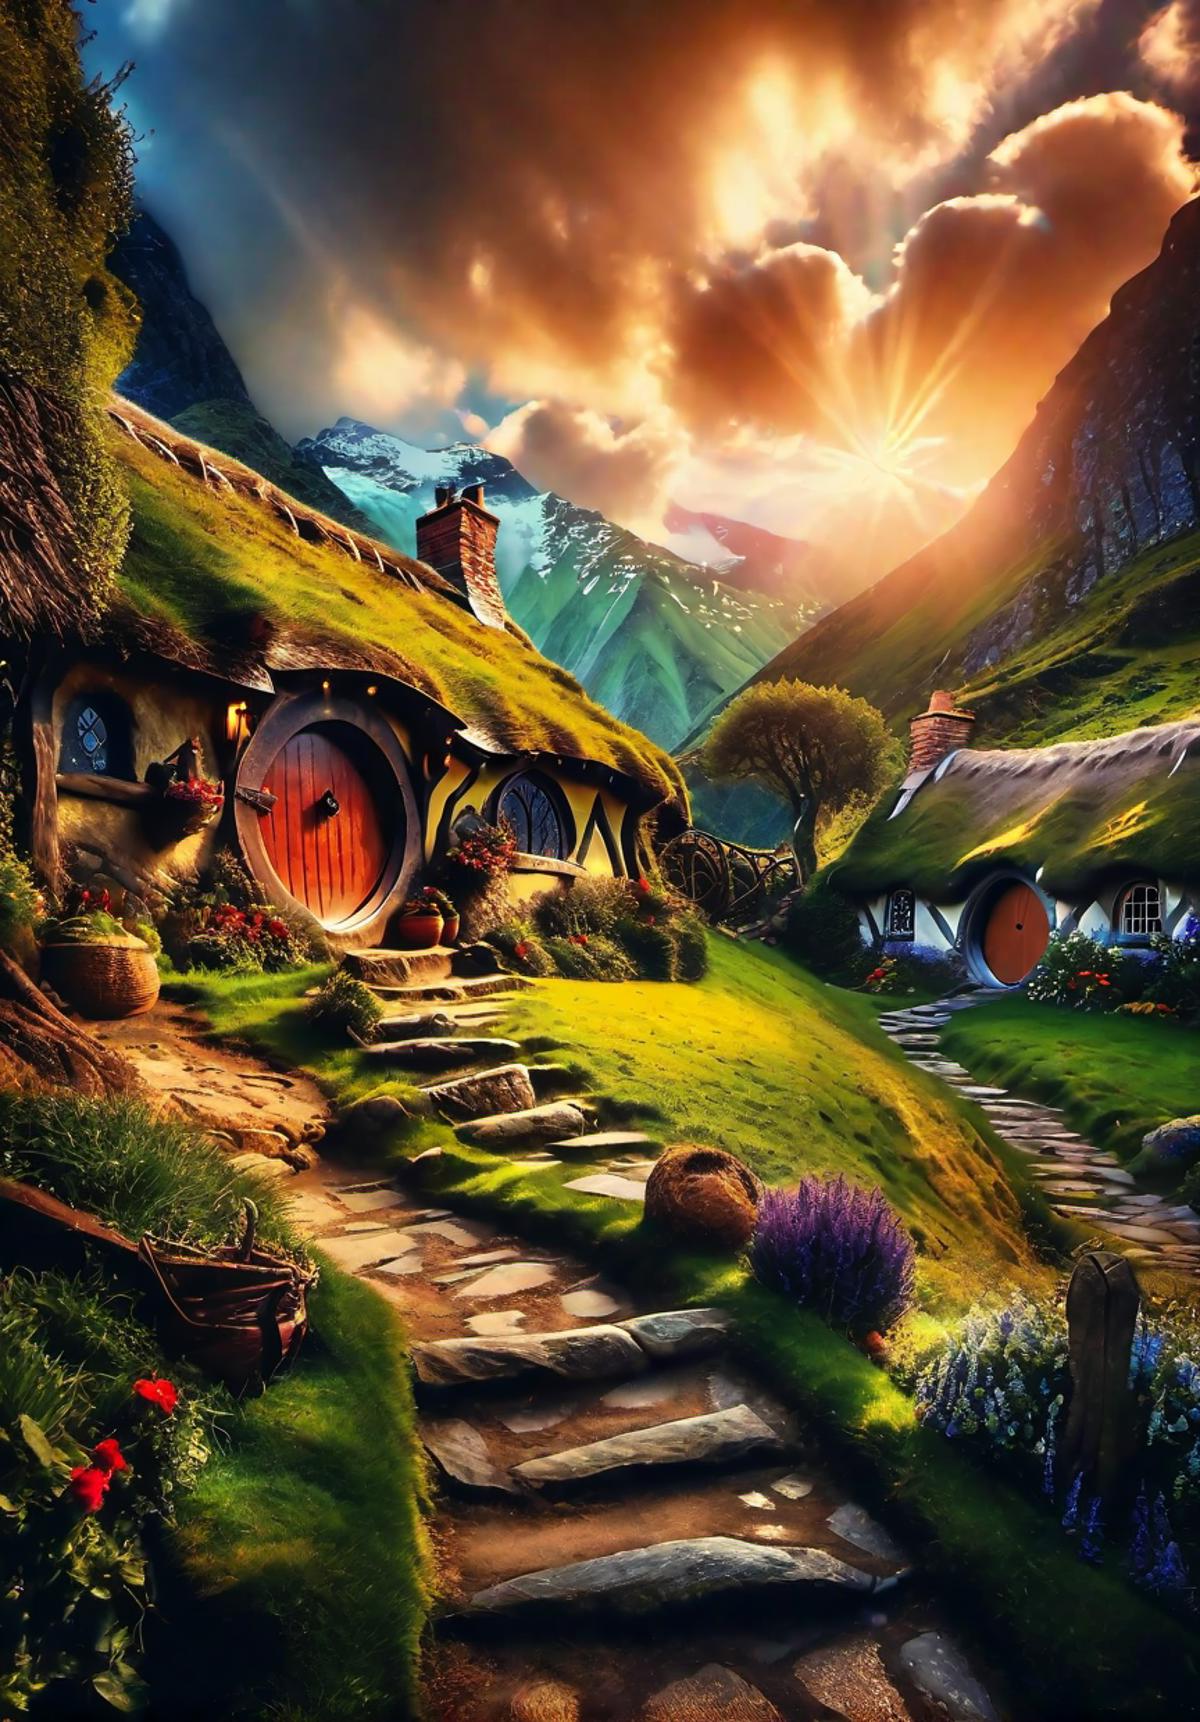 A picturesque scene of a hobbit house with a mountain backdrop and a sunlit sky.